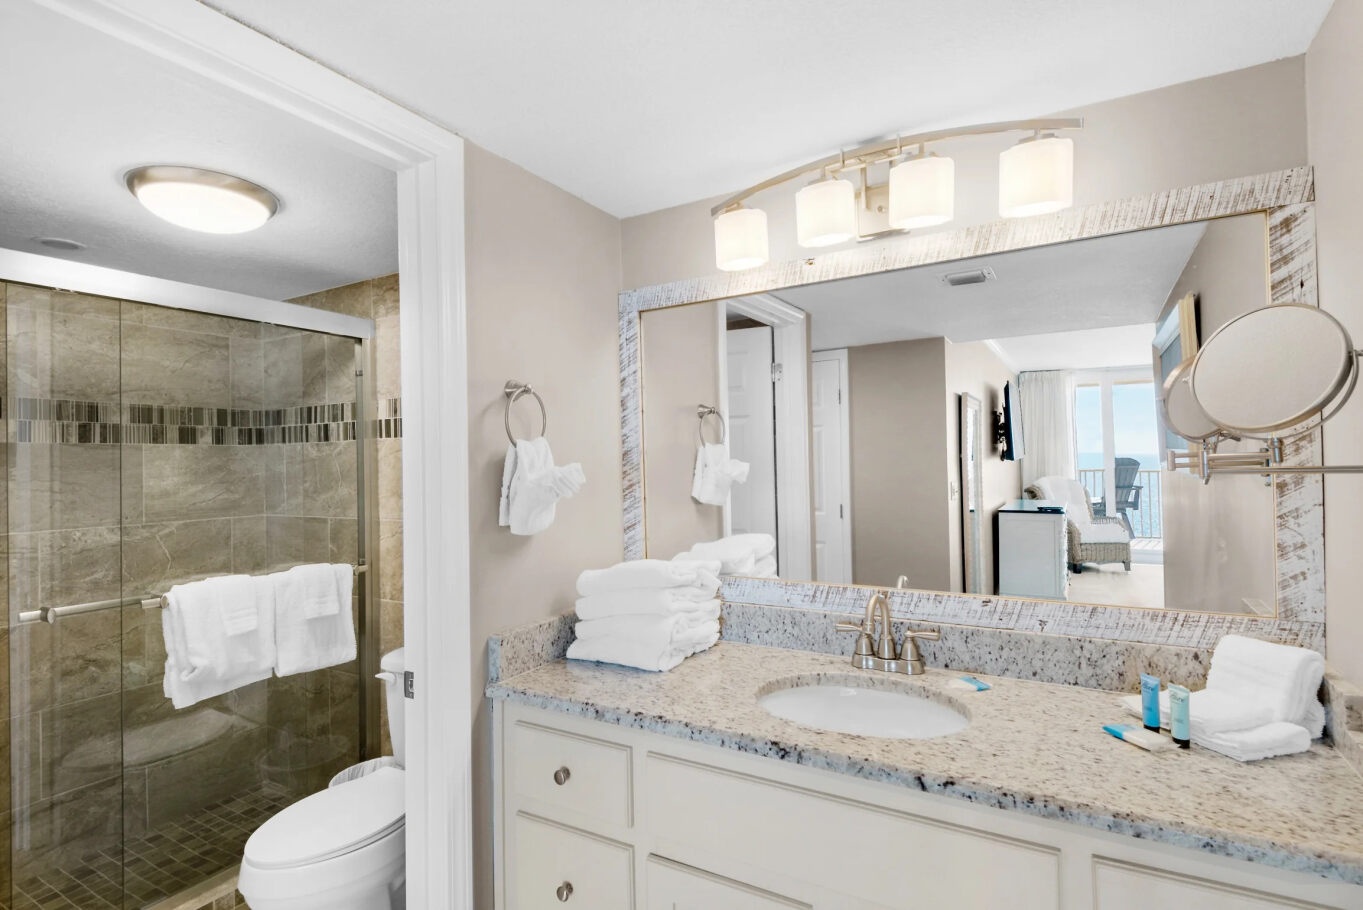 The primary king en suite offers a spacious single vanity & glass shower